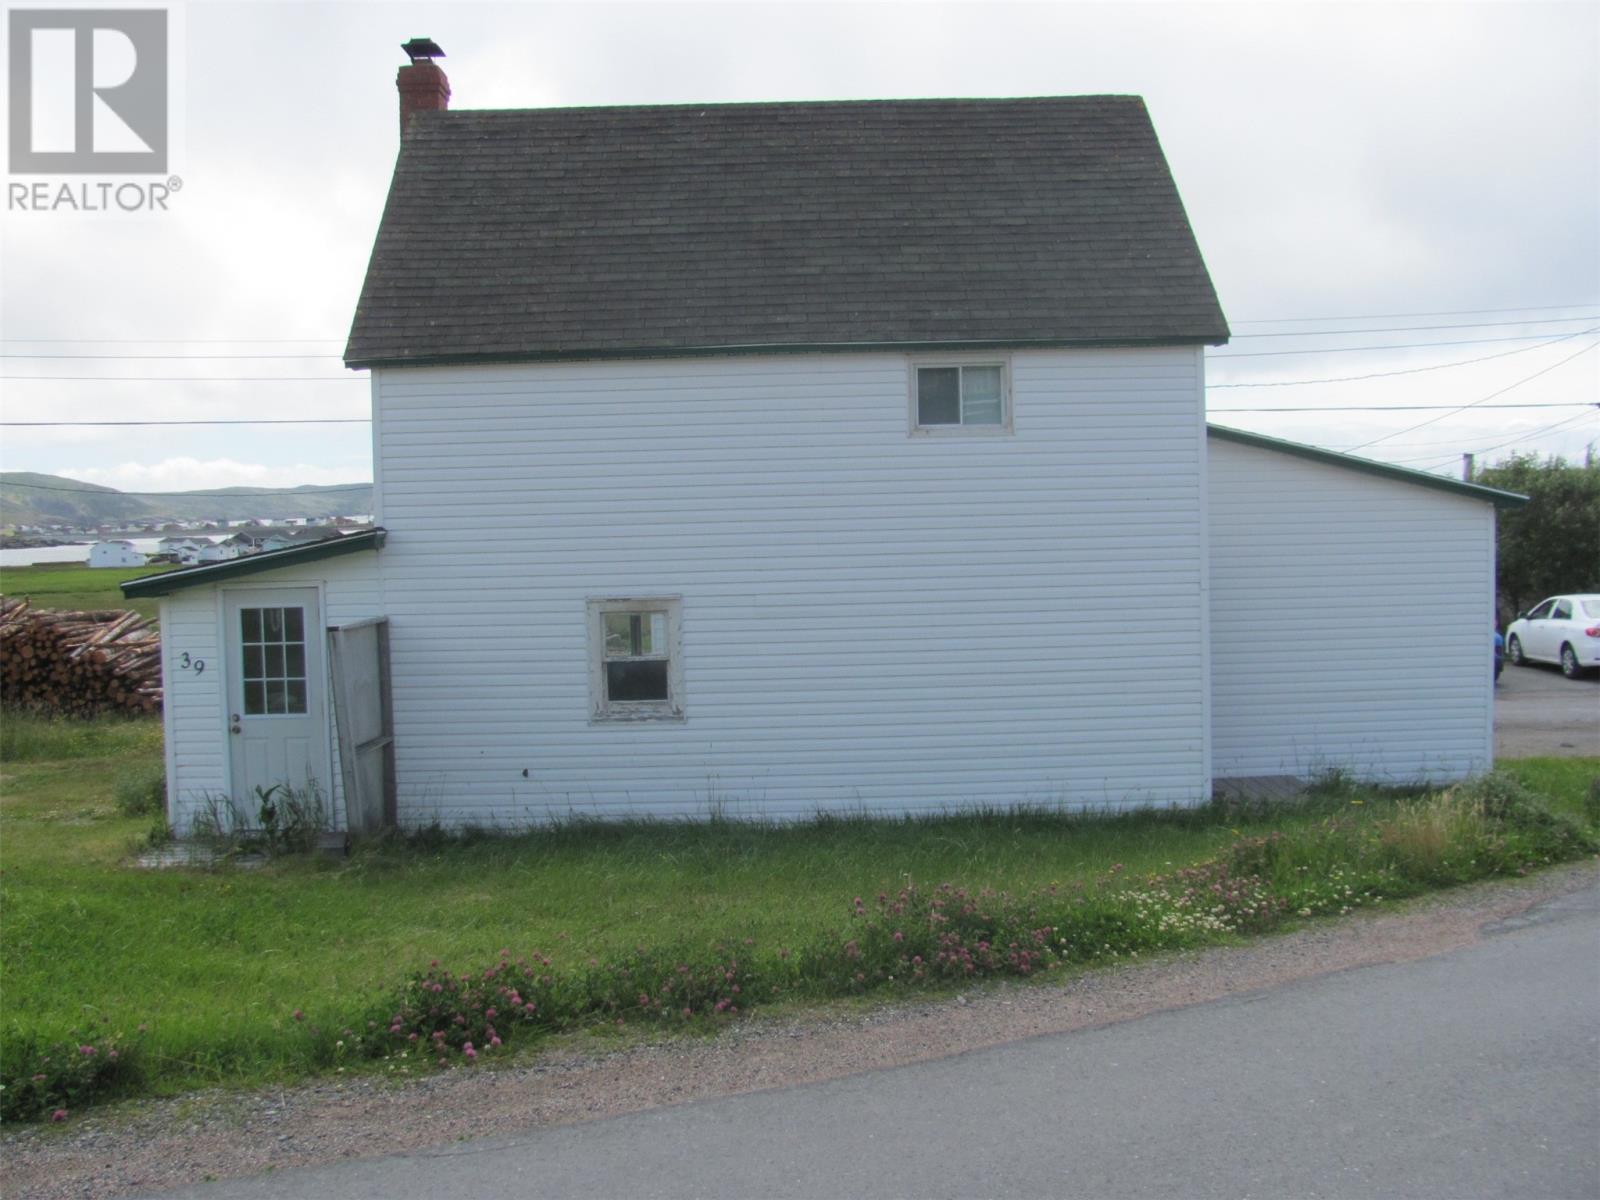 39-43 Red Point Road, Bonavista, A0C1B0, 2 Bedrooms Bedrooms, ,1 BathroomBathrooms,Single Family,For sale,Red Point,1233831